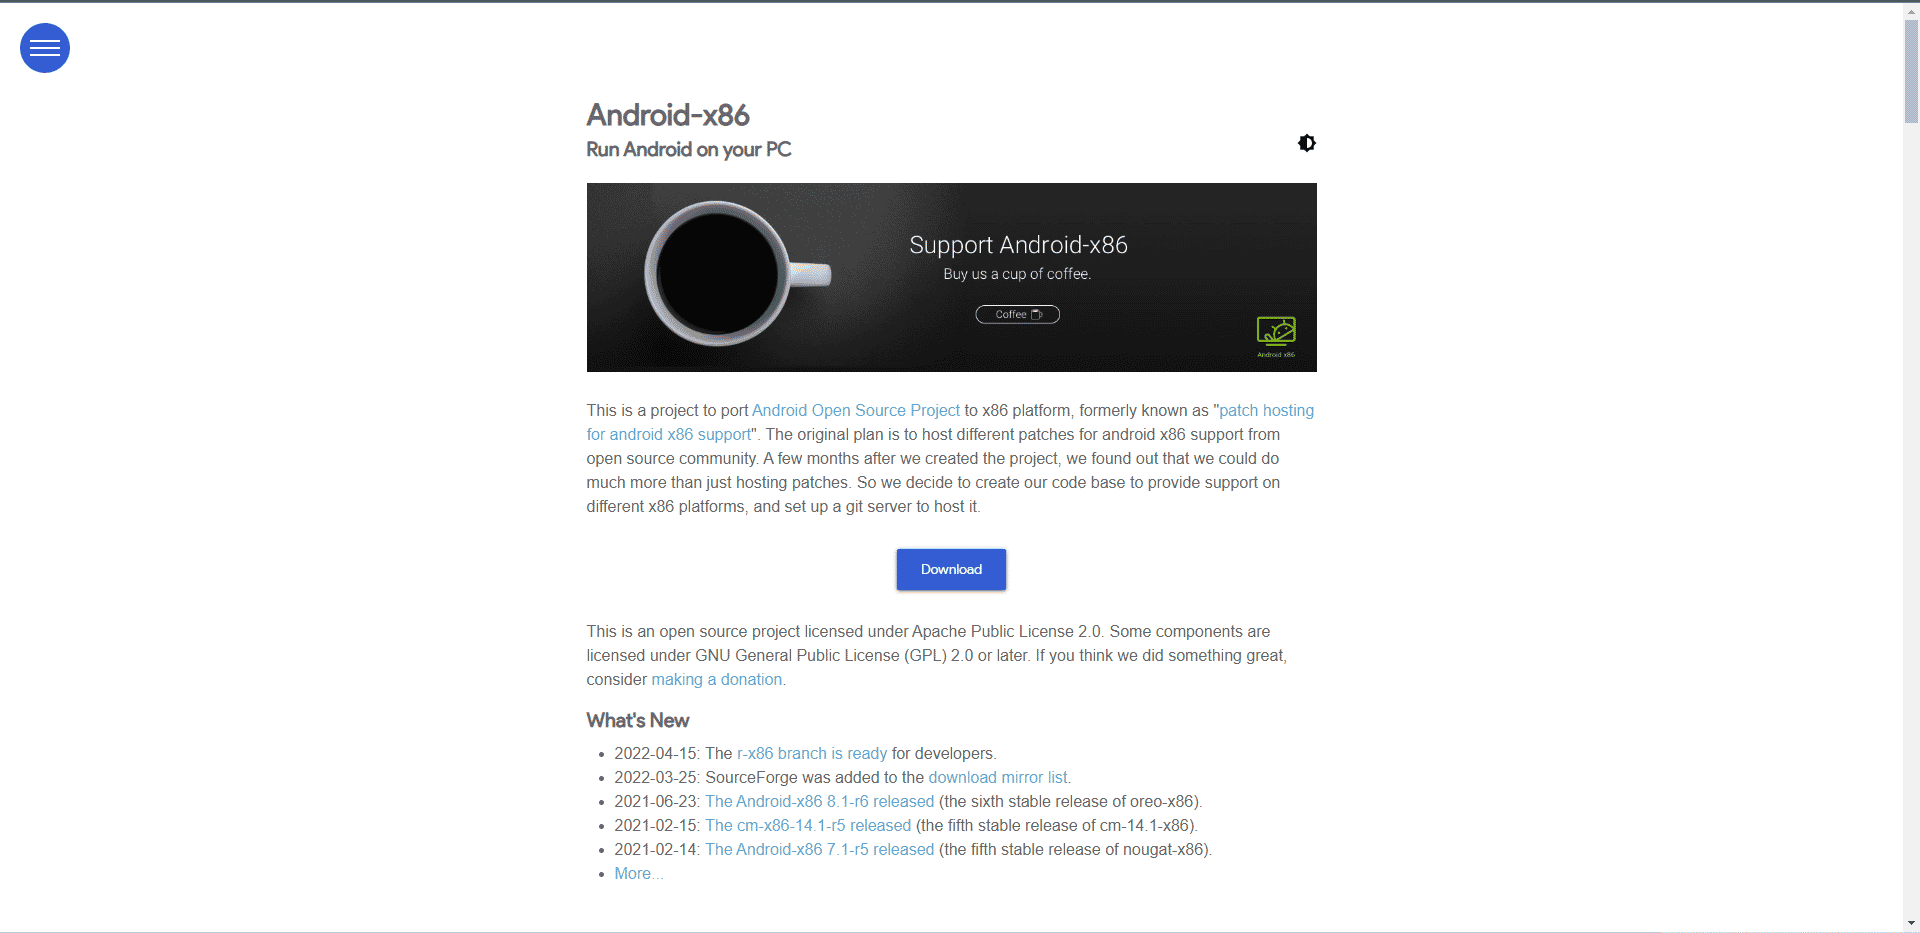 Android x86 official website